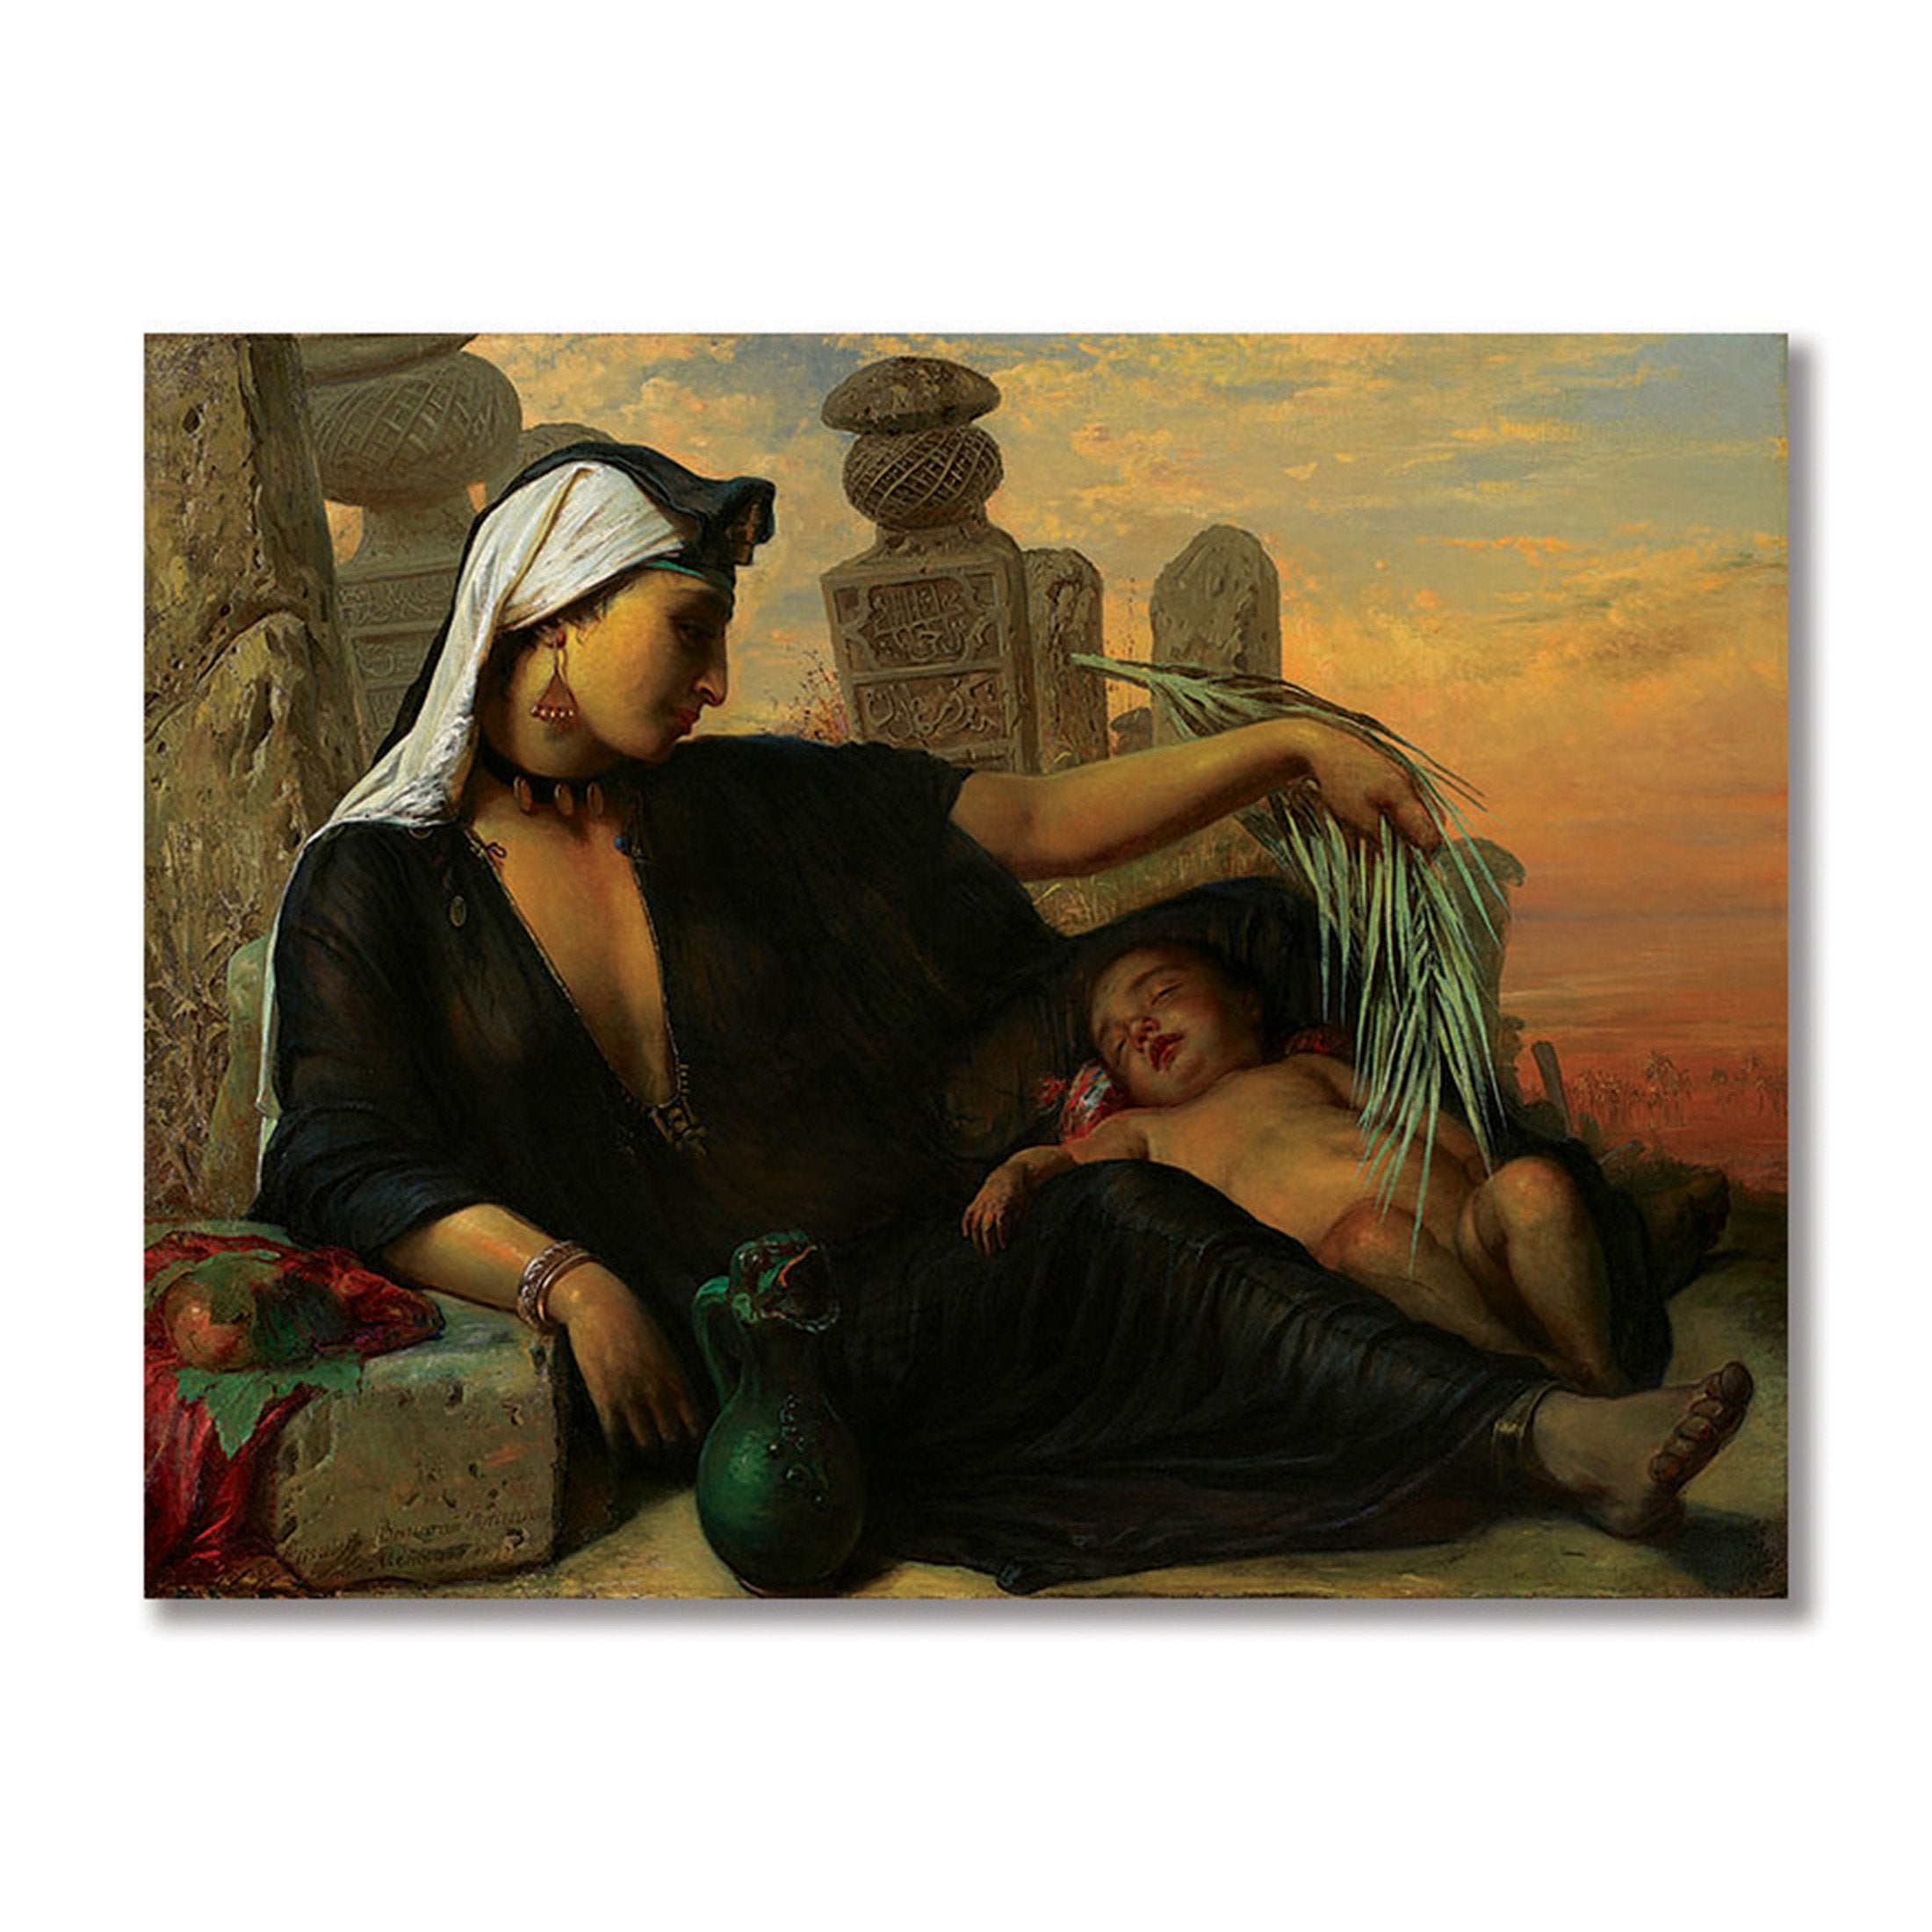 An Egyptian Fellah Woman with her Baby